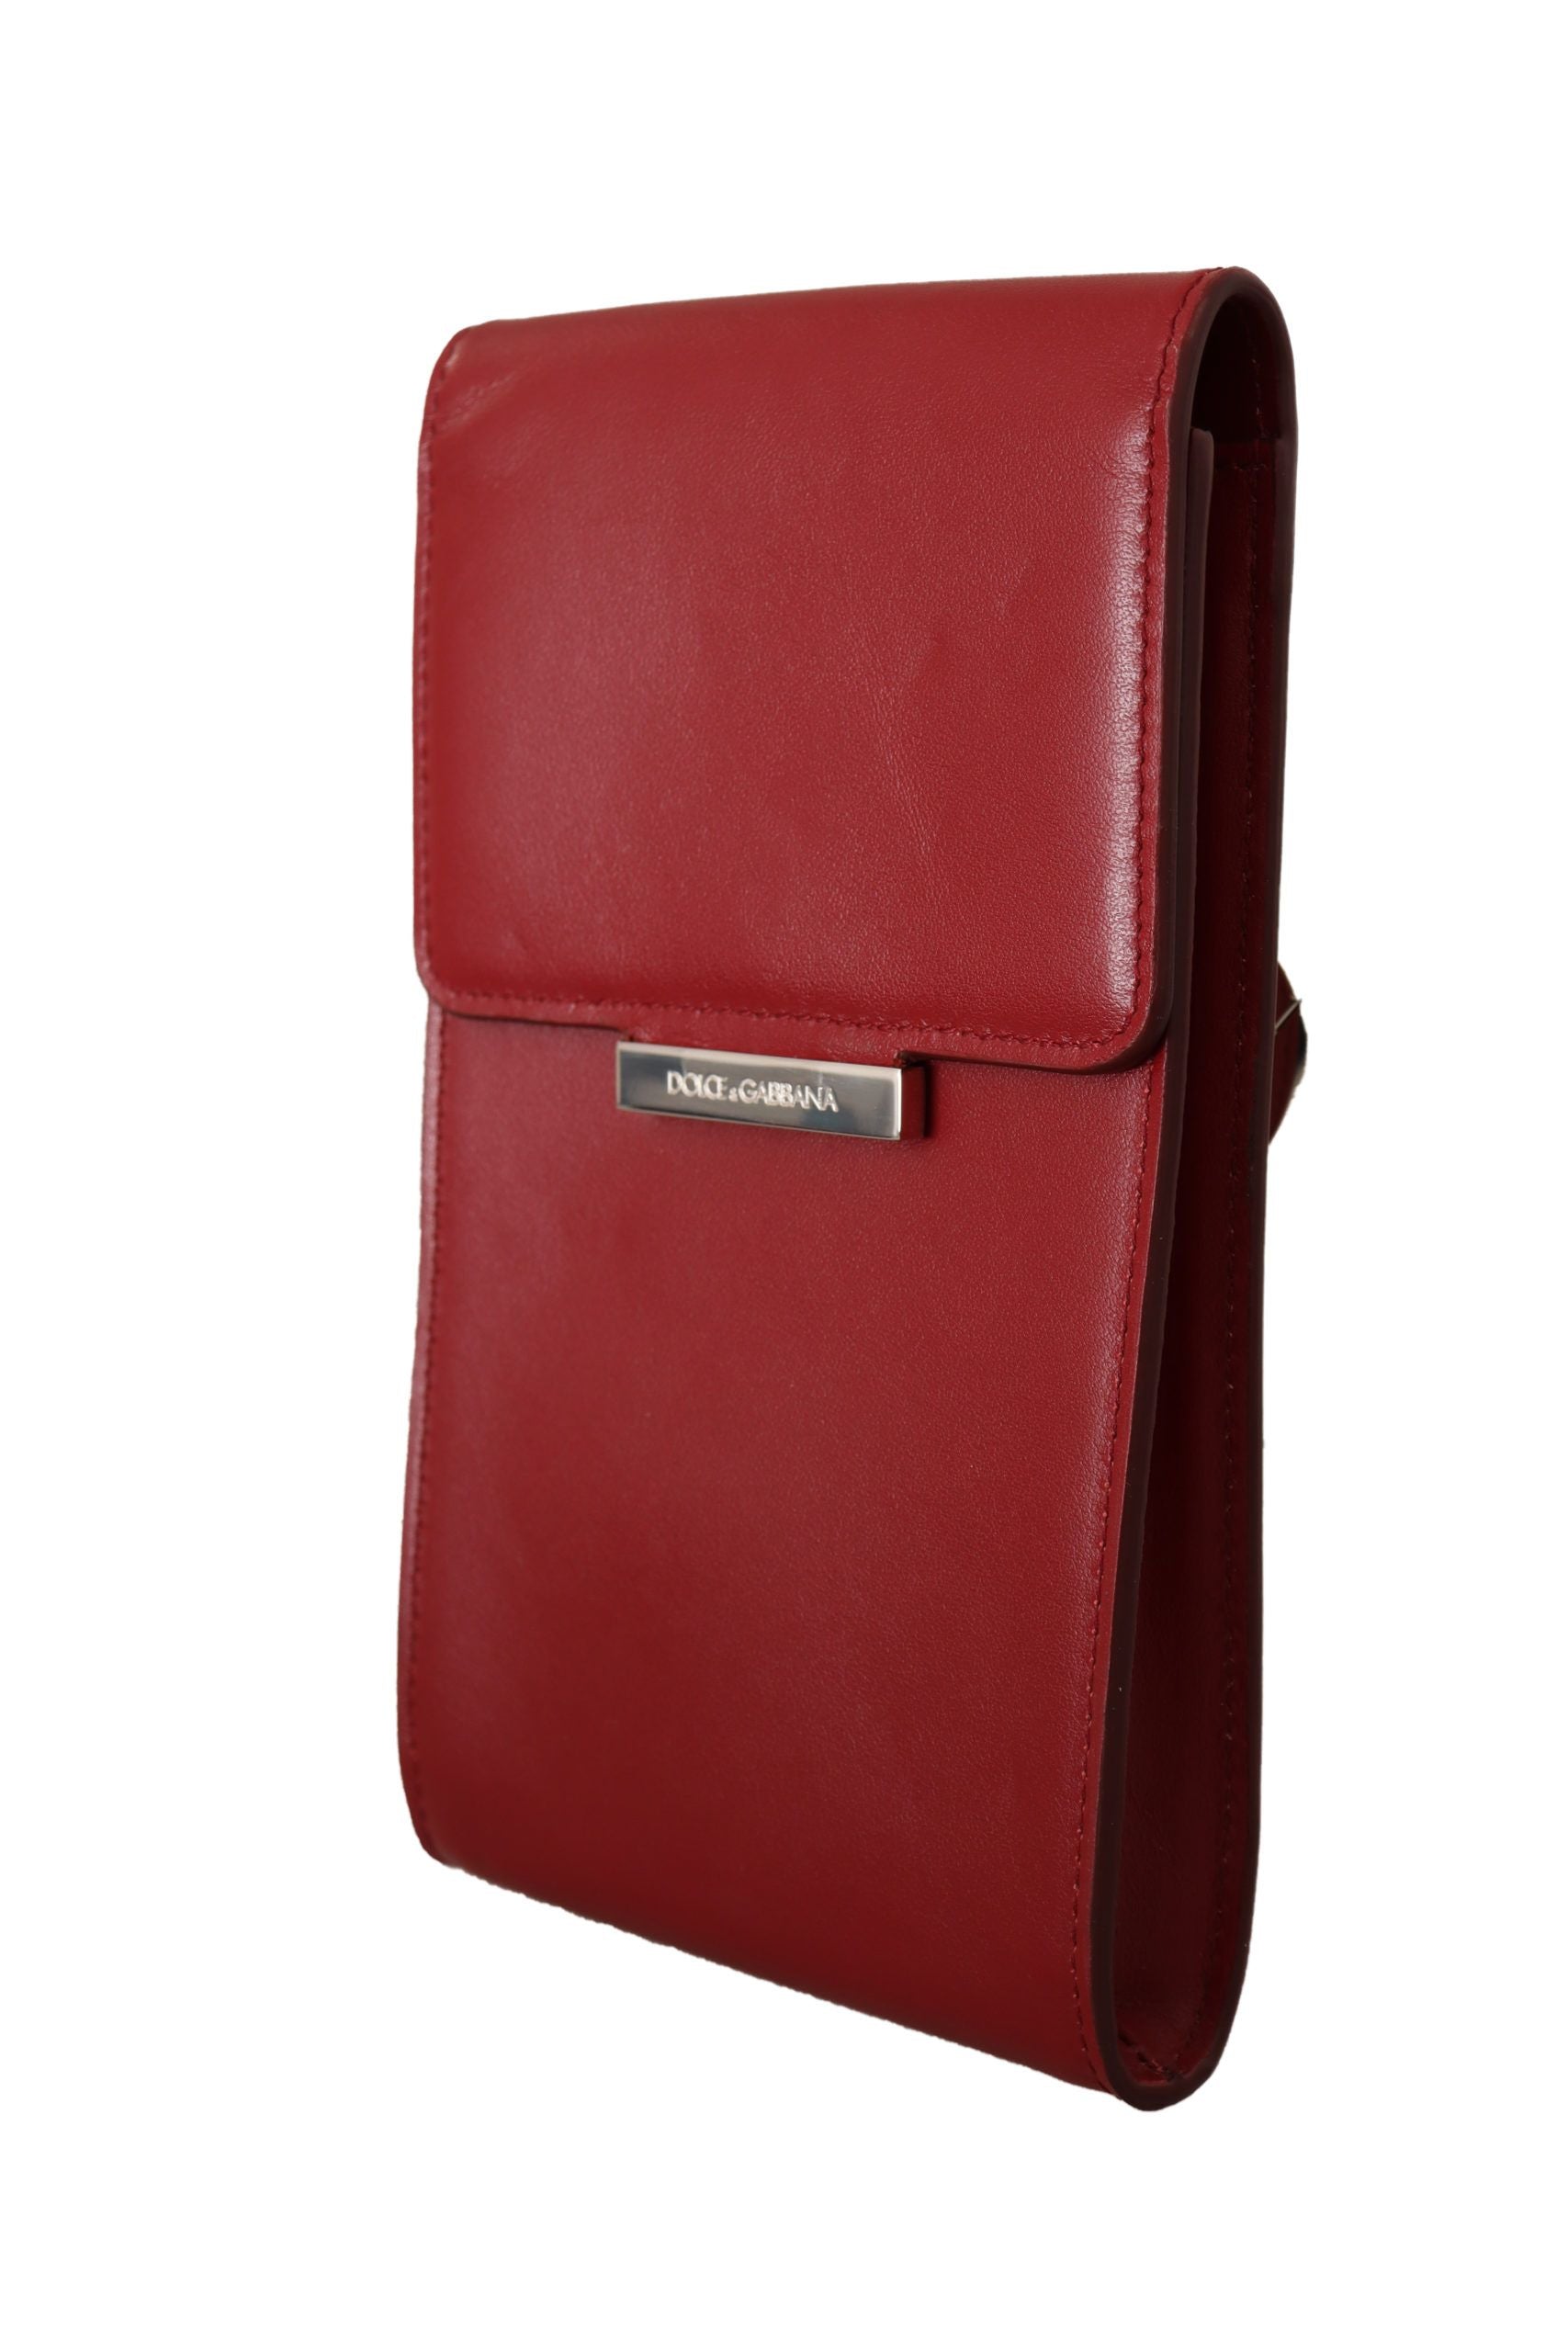 Red Leather Universal Phone Pocket Case